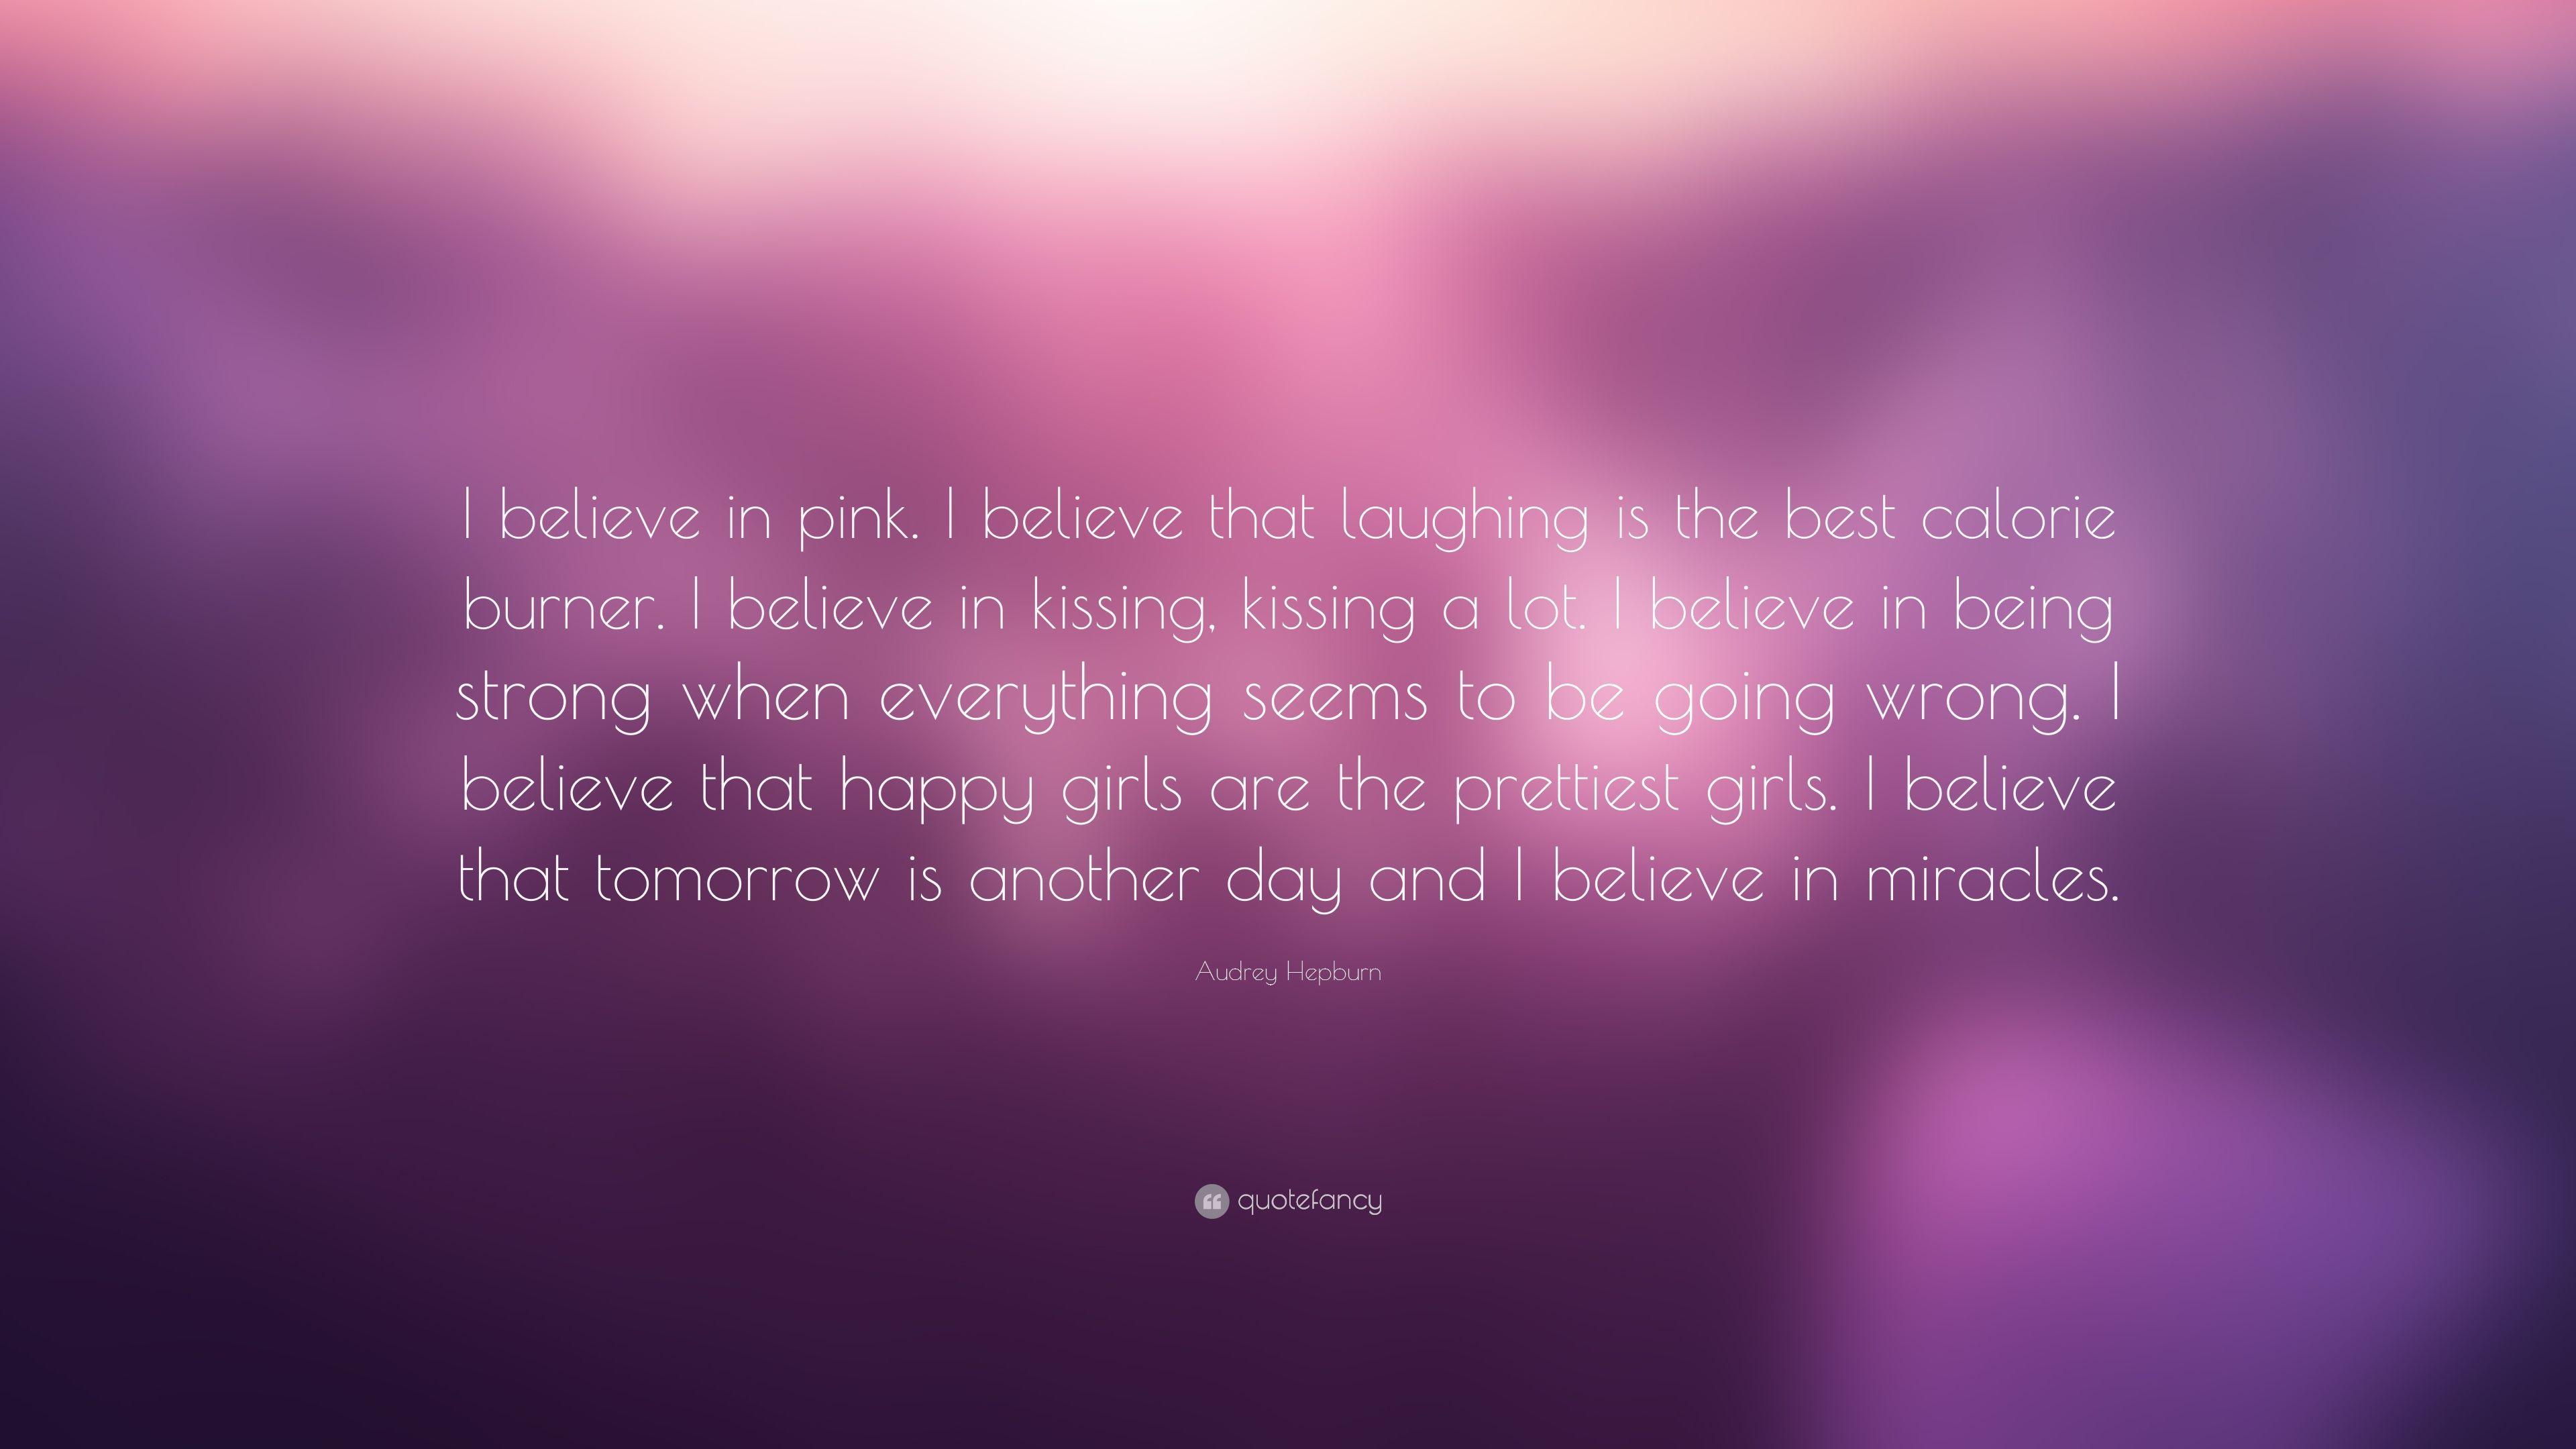 Audrey Hepburn Quote: “I believe in pink. I believe that laughing is